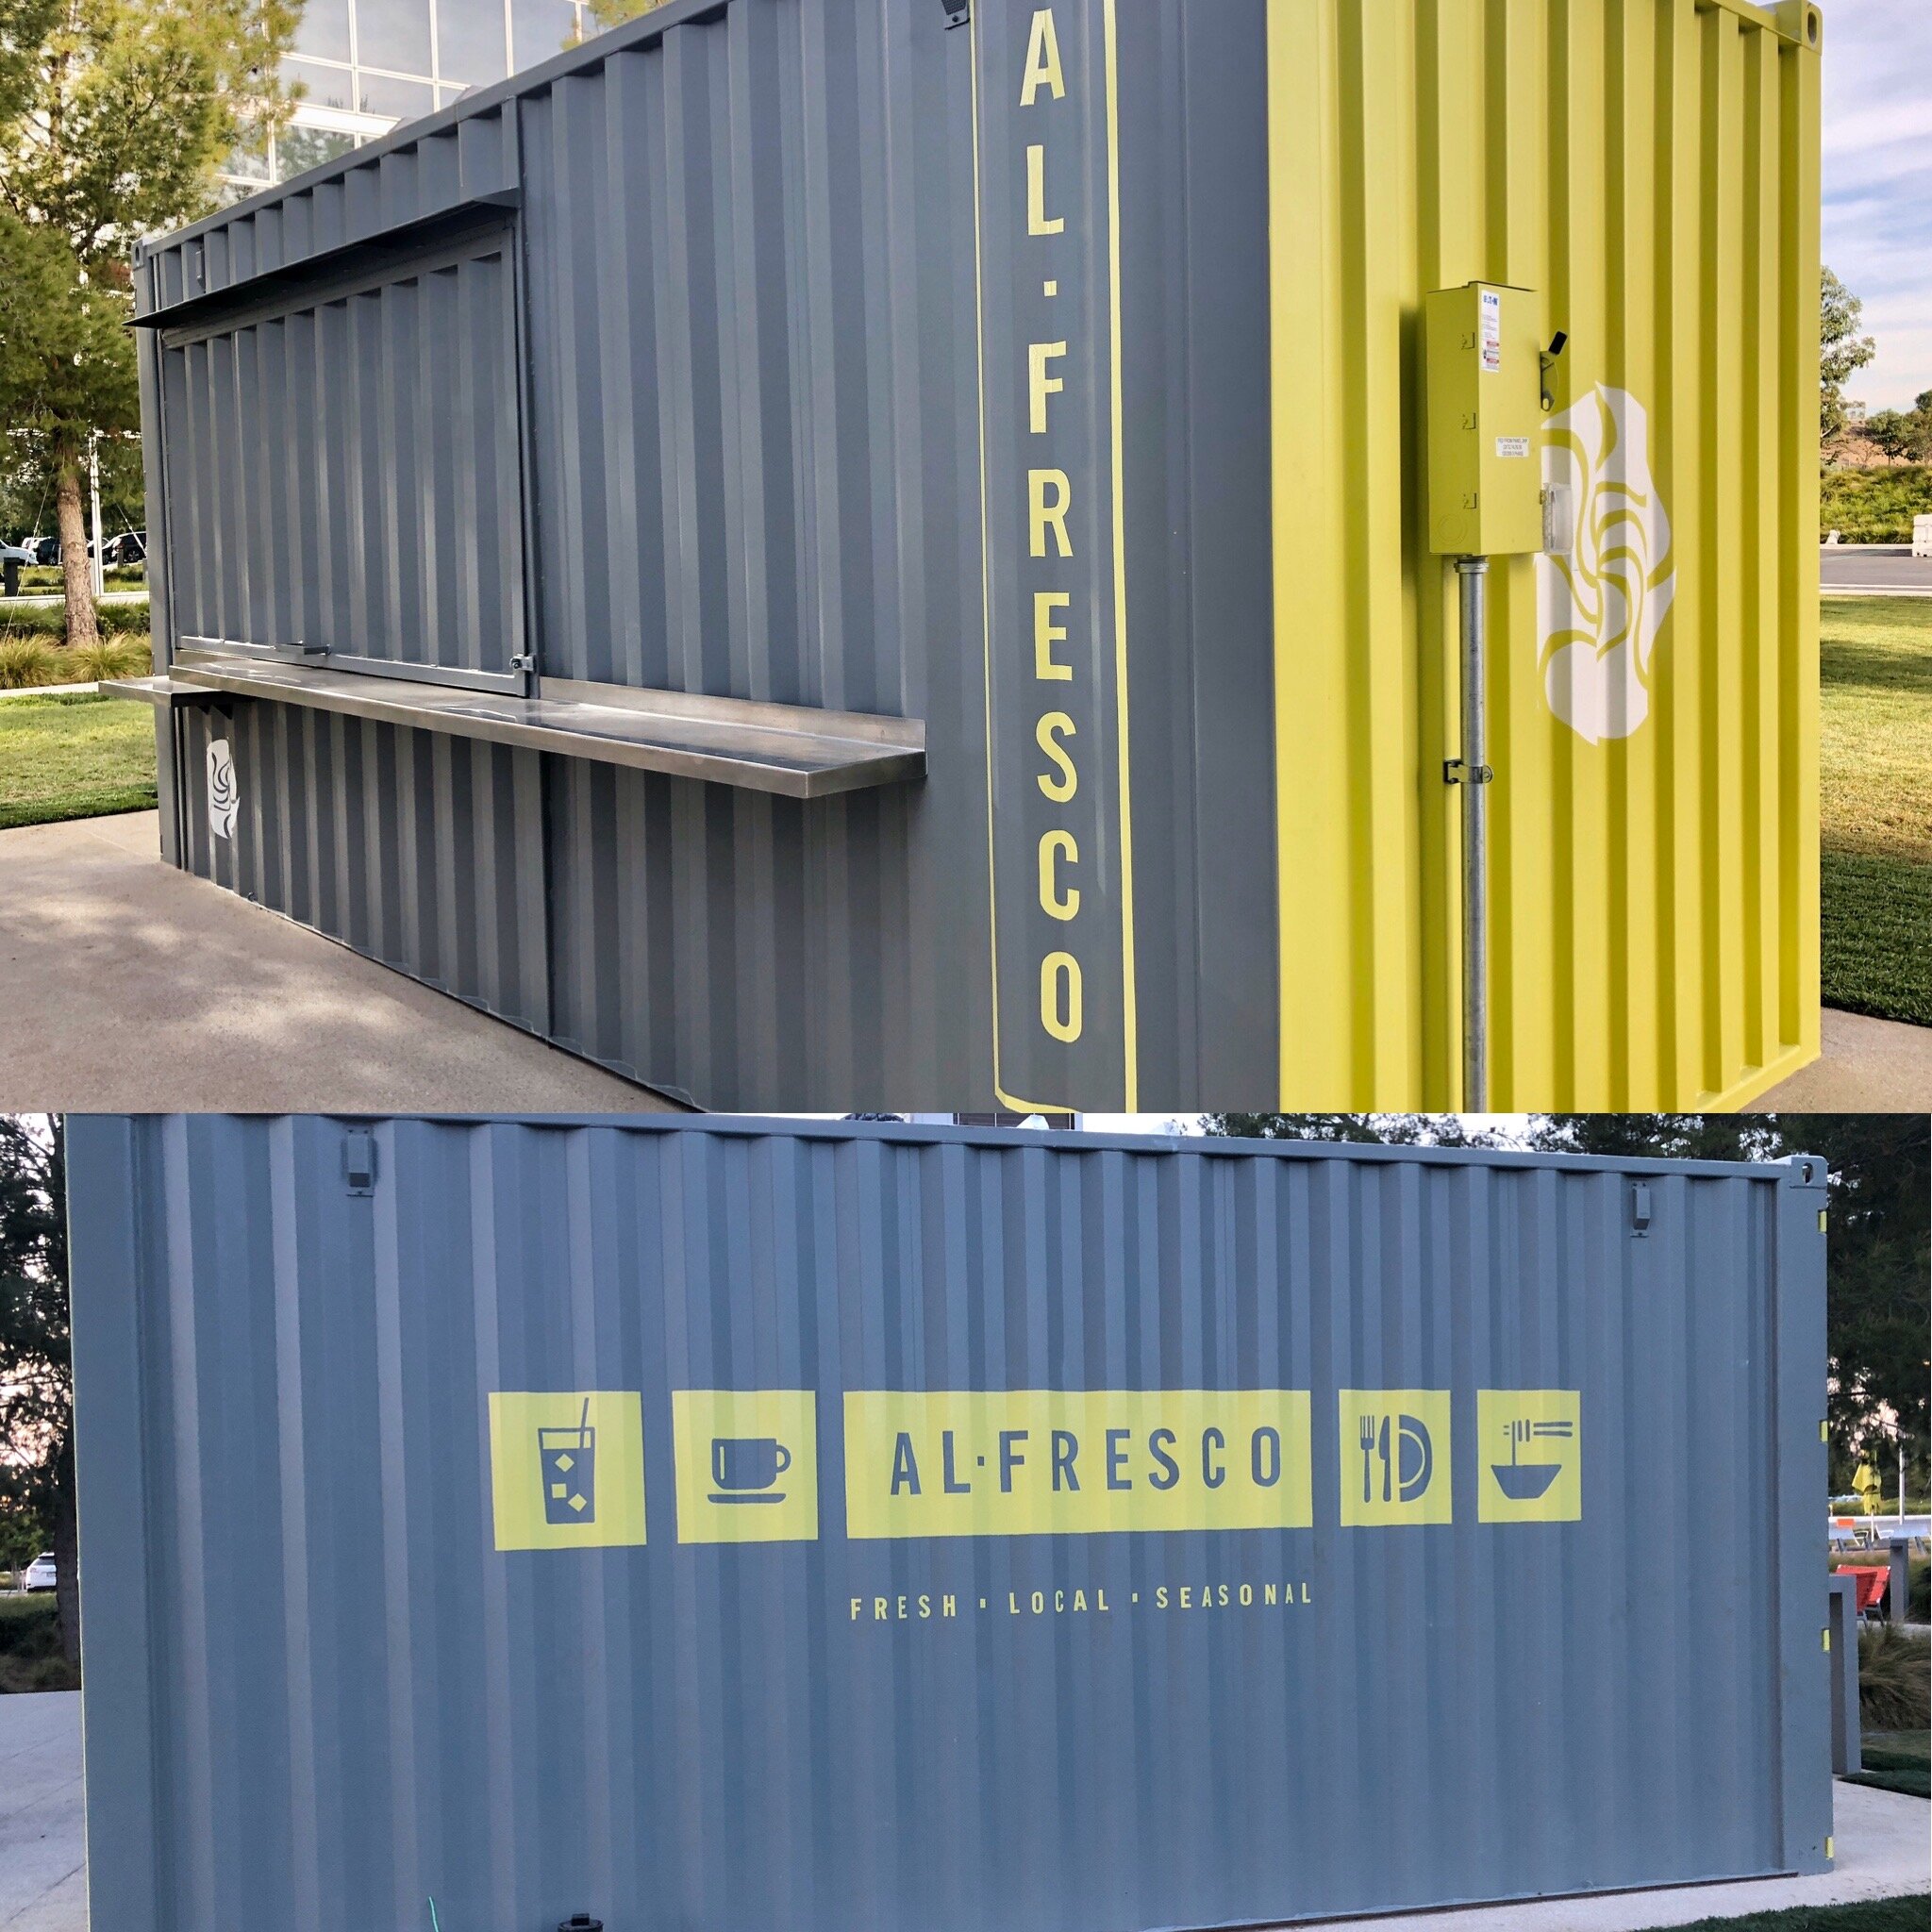 Al Fresco Restaurant hand painted shipping container signage